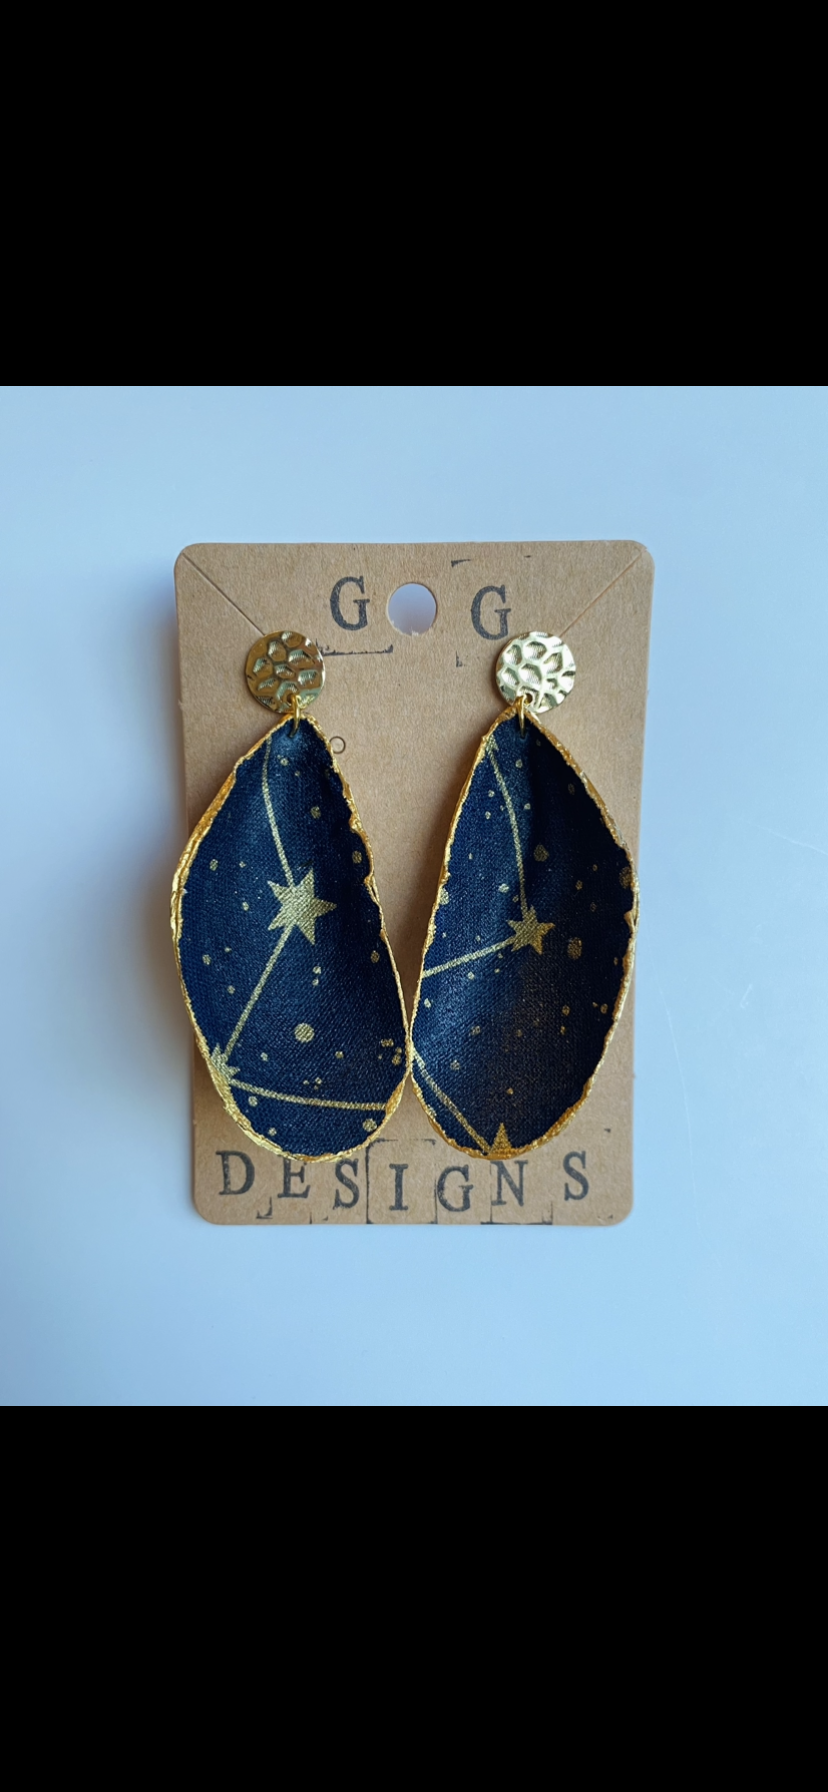 Fabric shell earrings - constellations